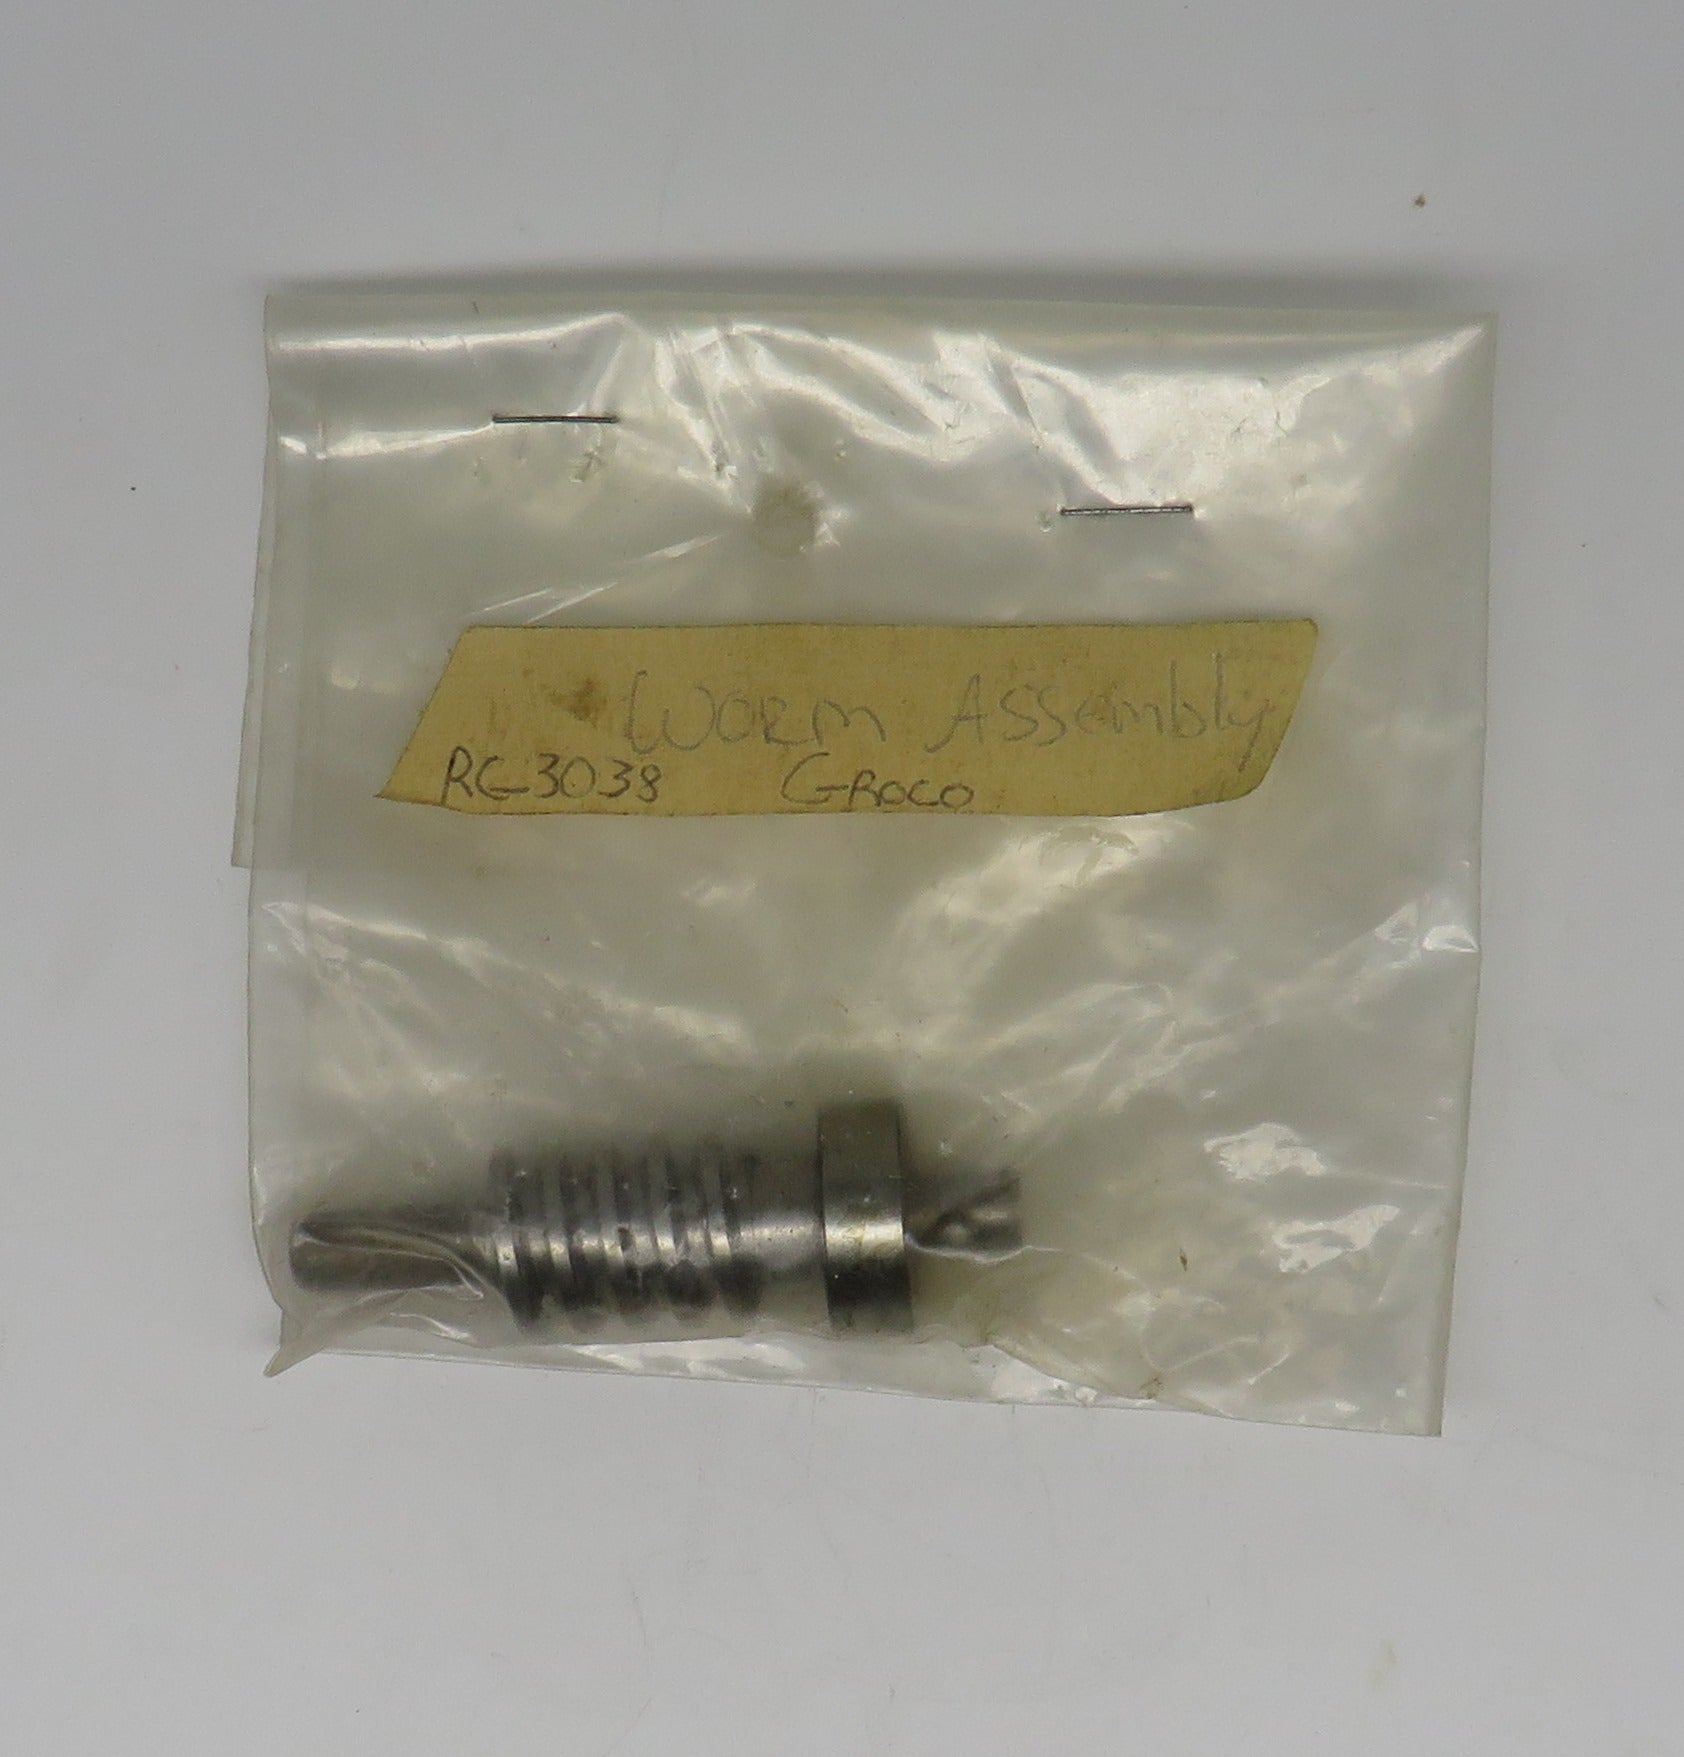 RG-3038 Groco Steel Worm Assembly for Groco Electric Conversion Kit